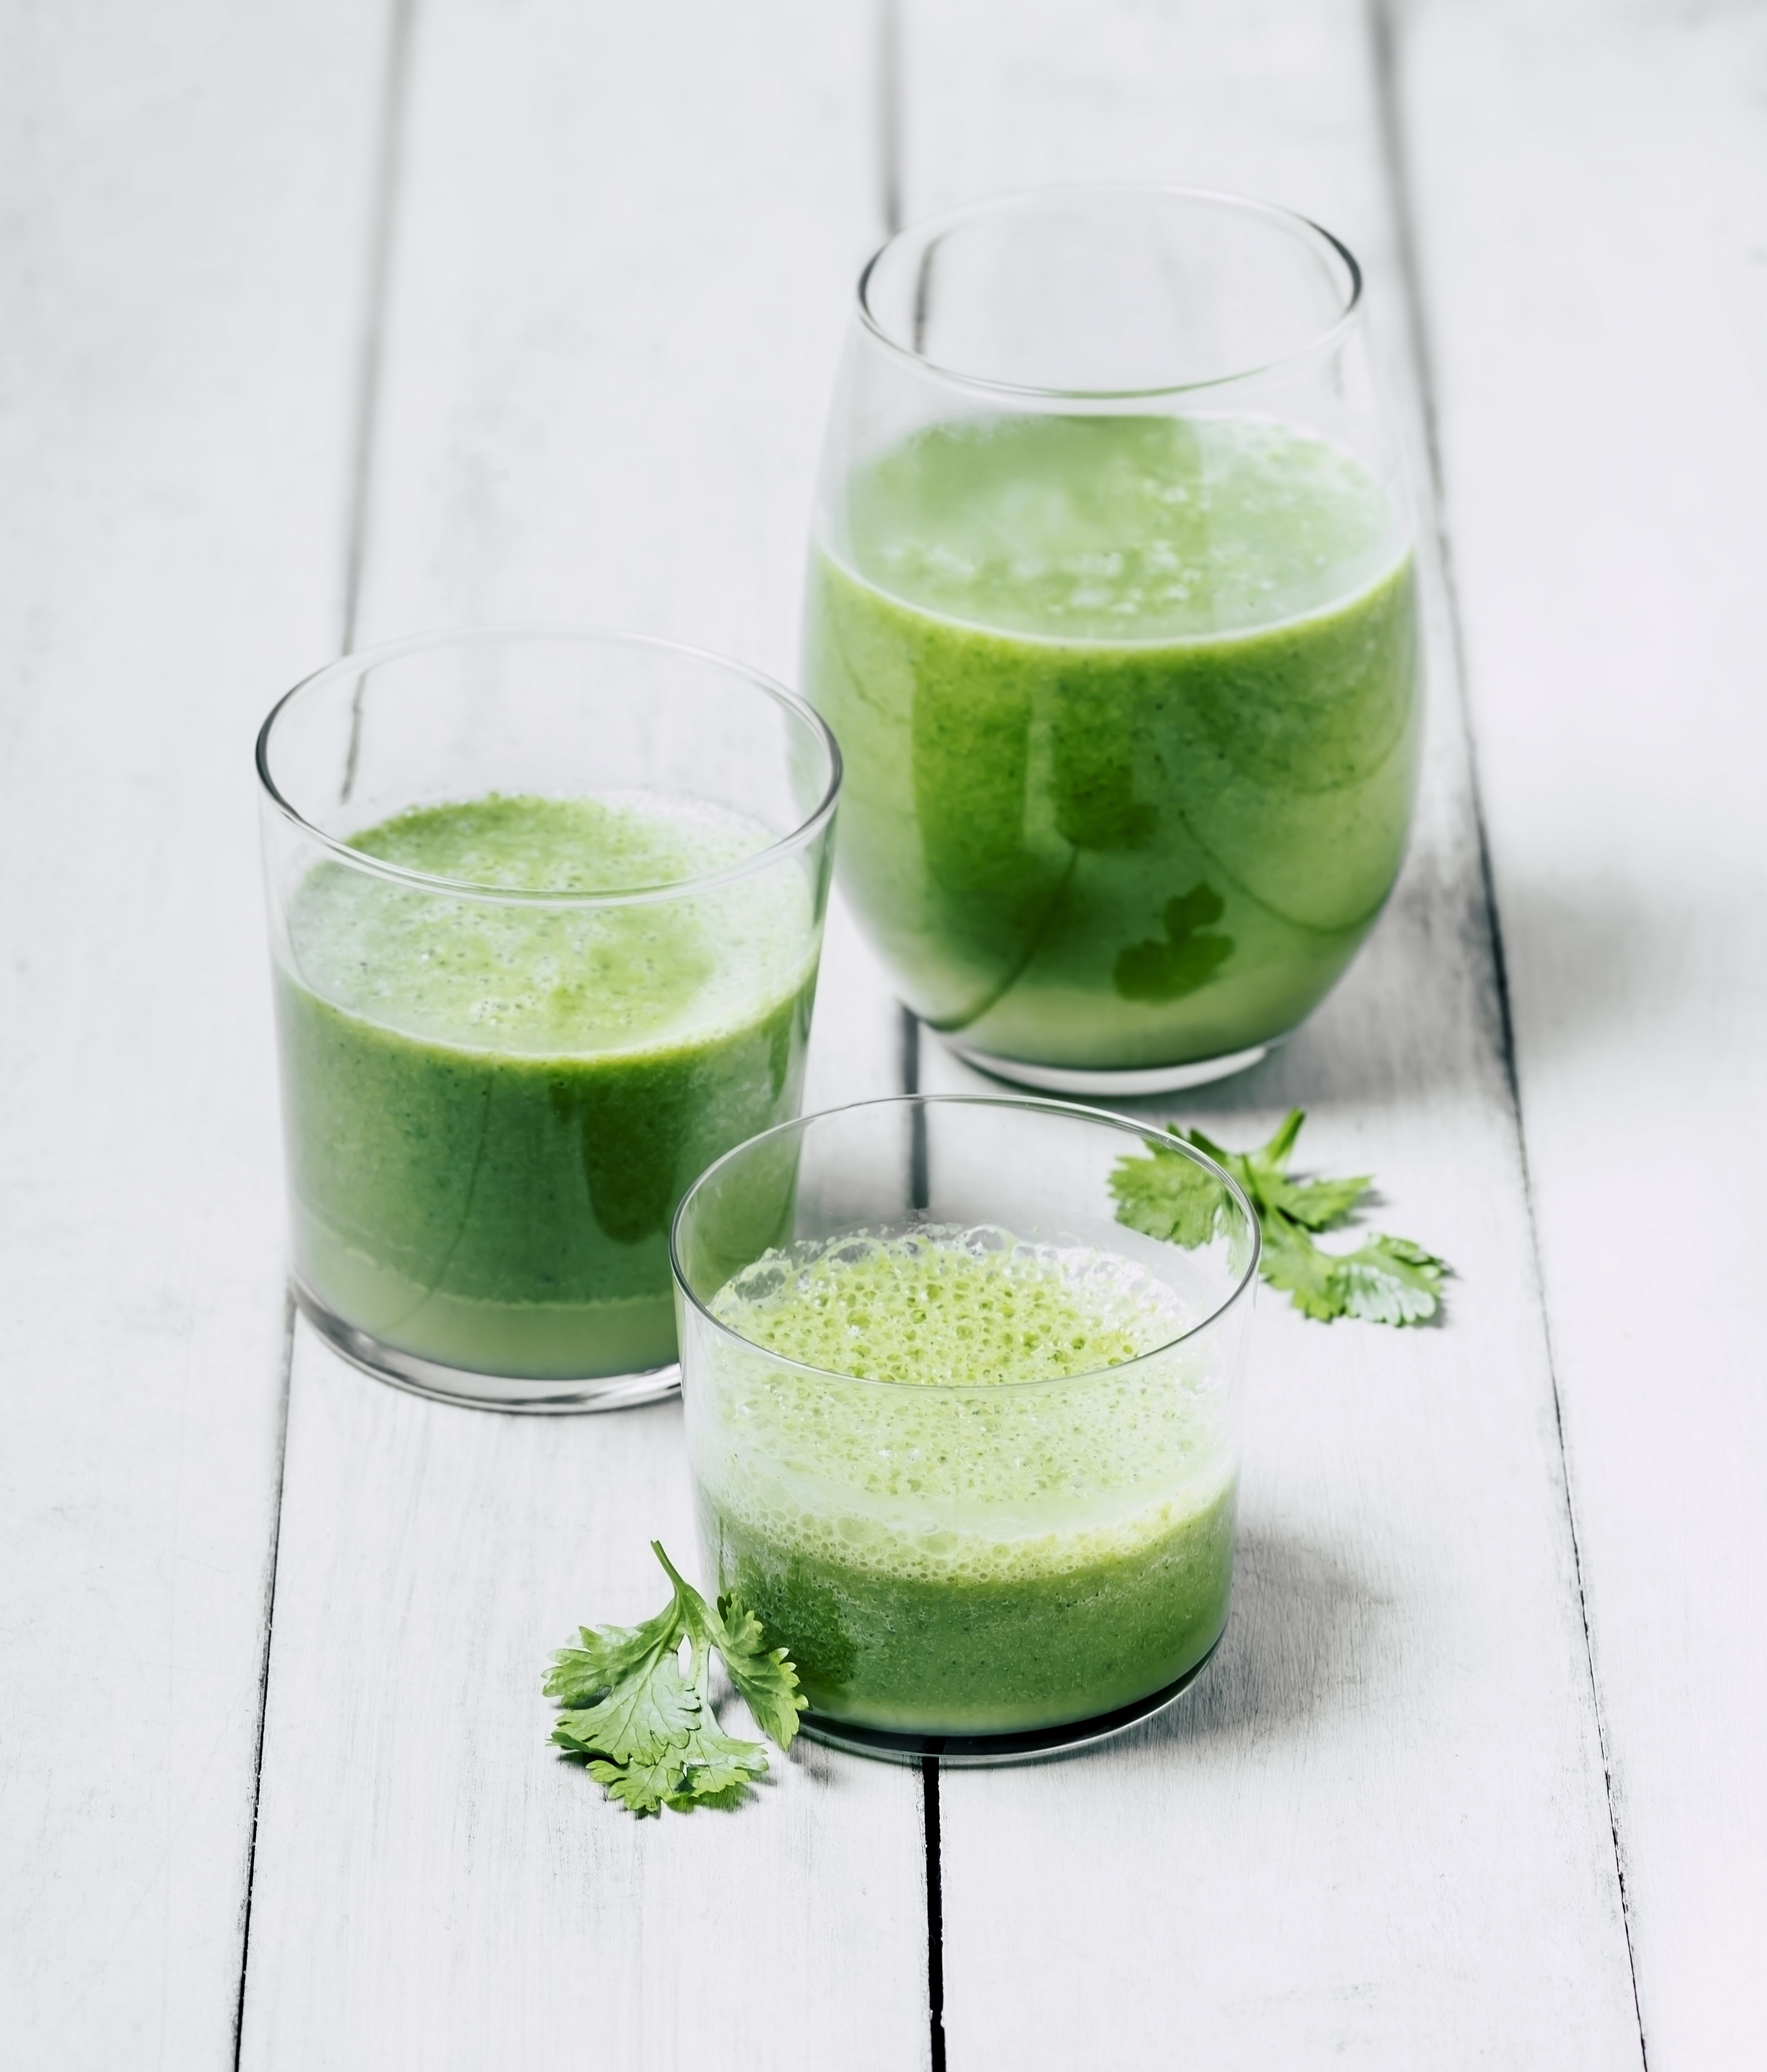 Green Vegetable Smoothie Royalty Free Image 1591123548 